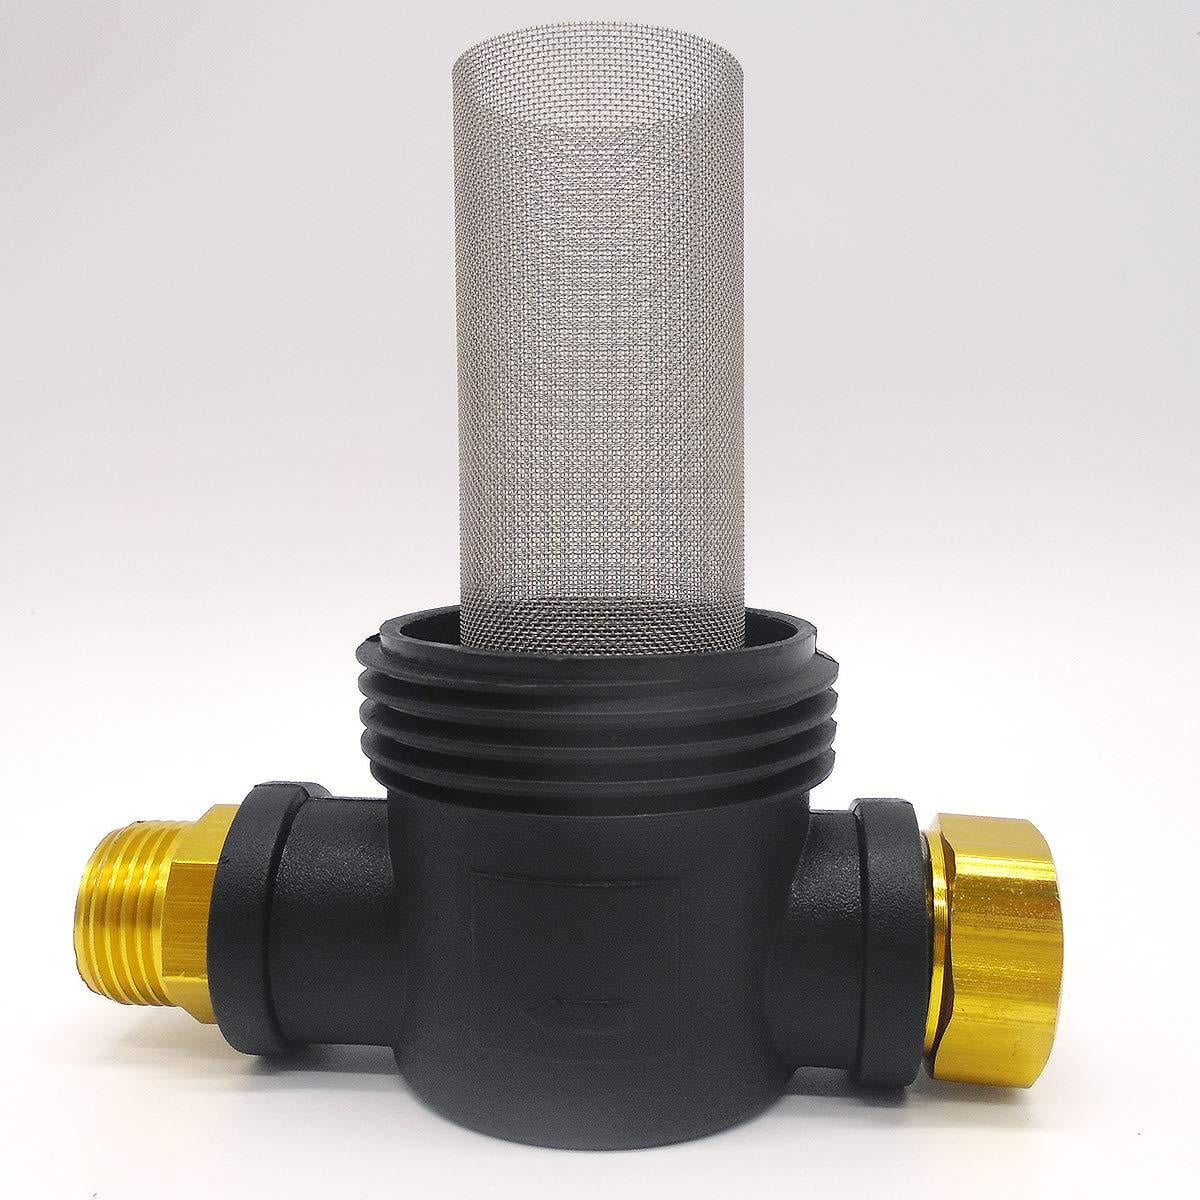 40 Mesh Ketofa Garden Hose Filter Attachment for Outdoor Gardening Inlet Water and Pressure Washers